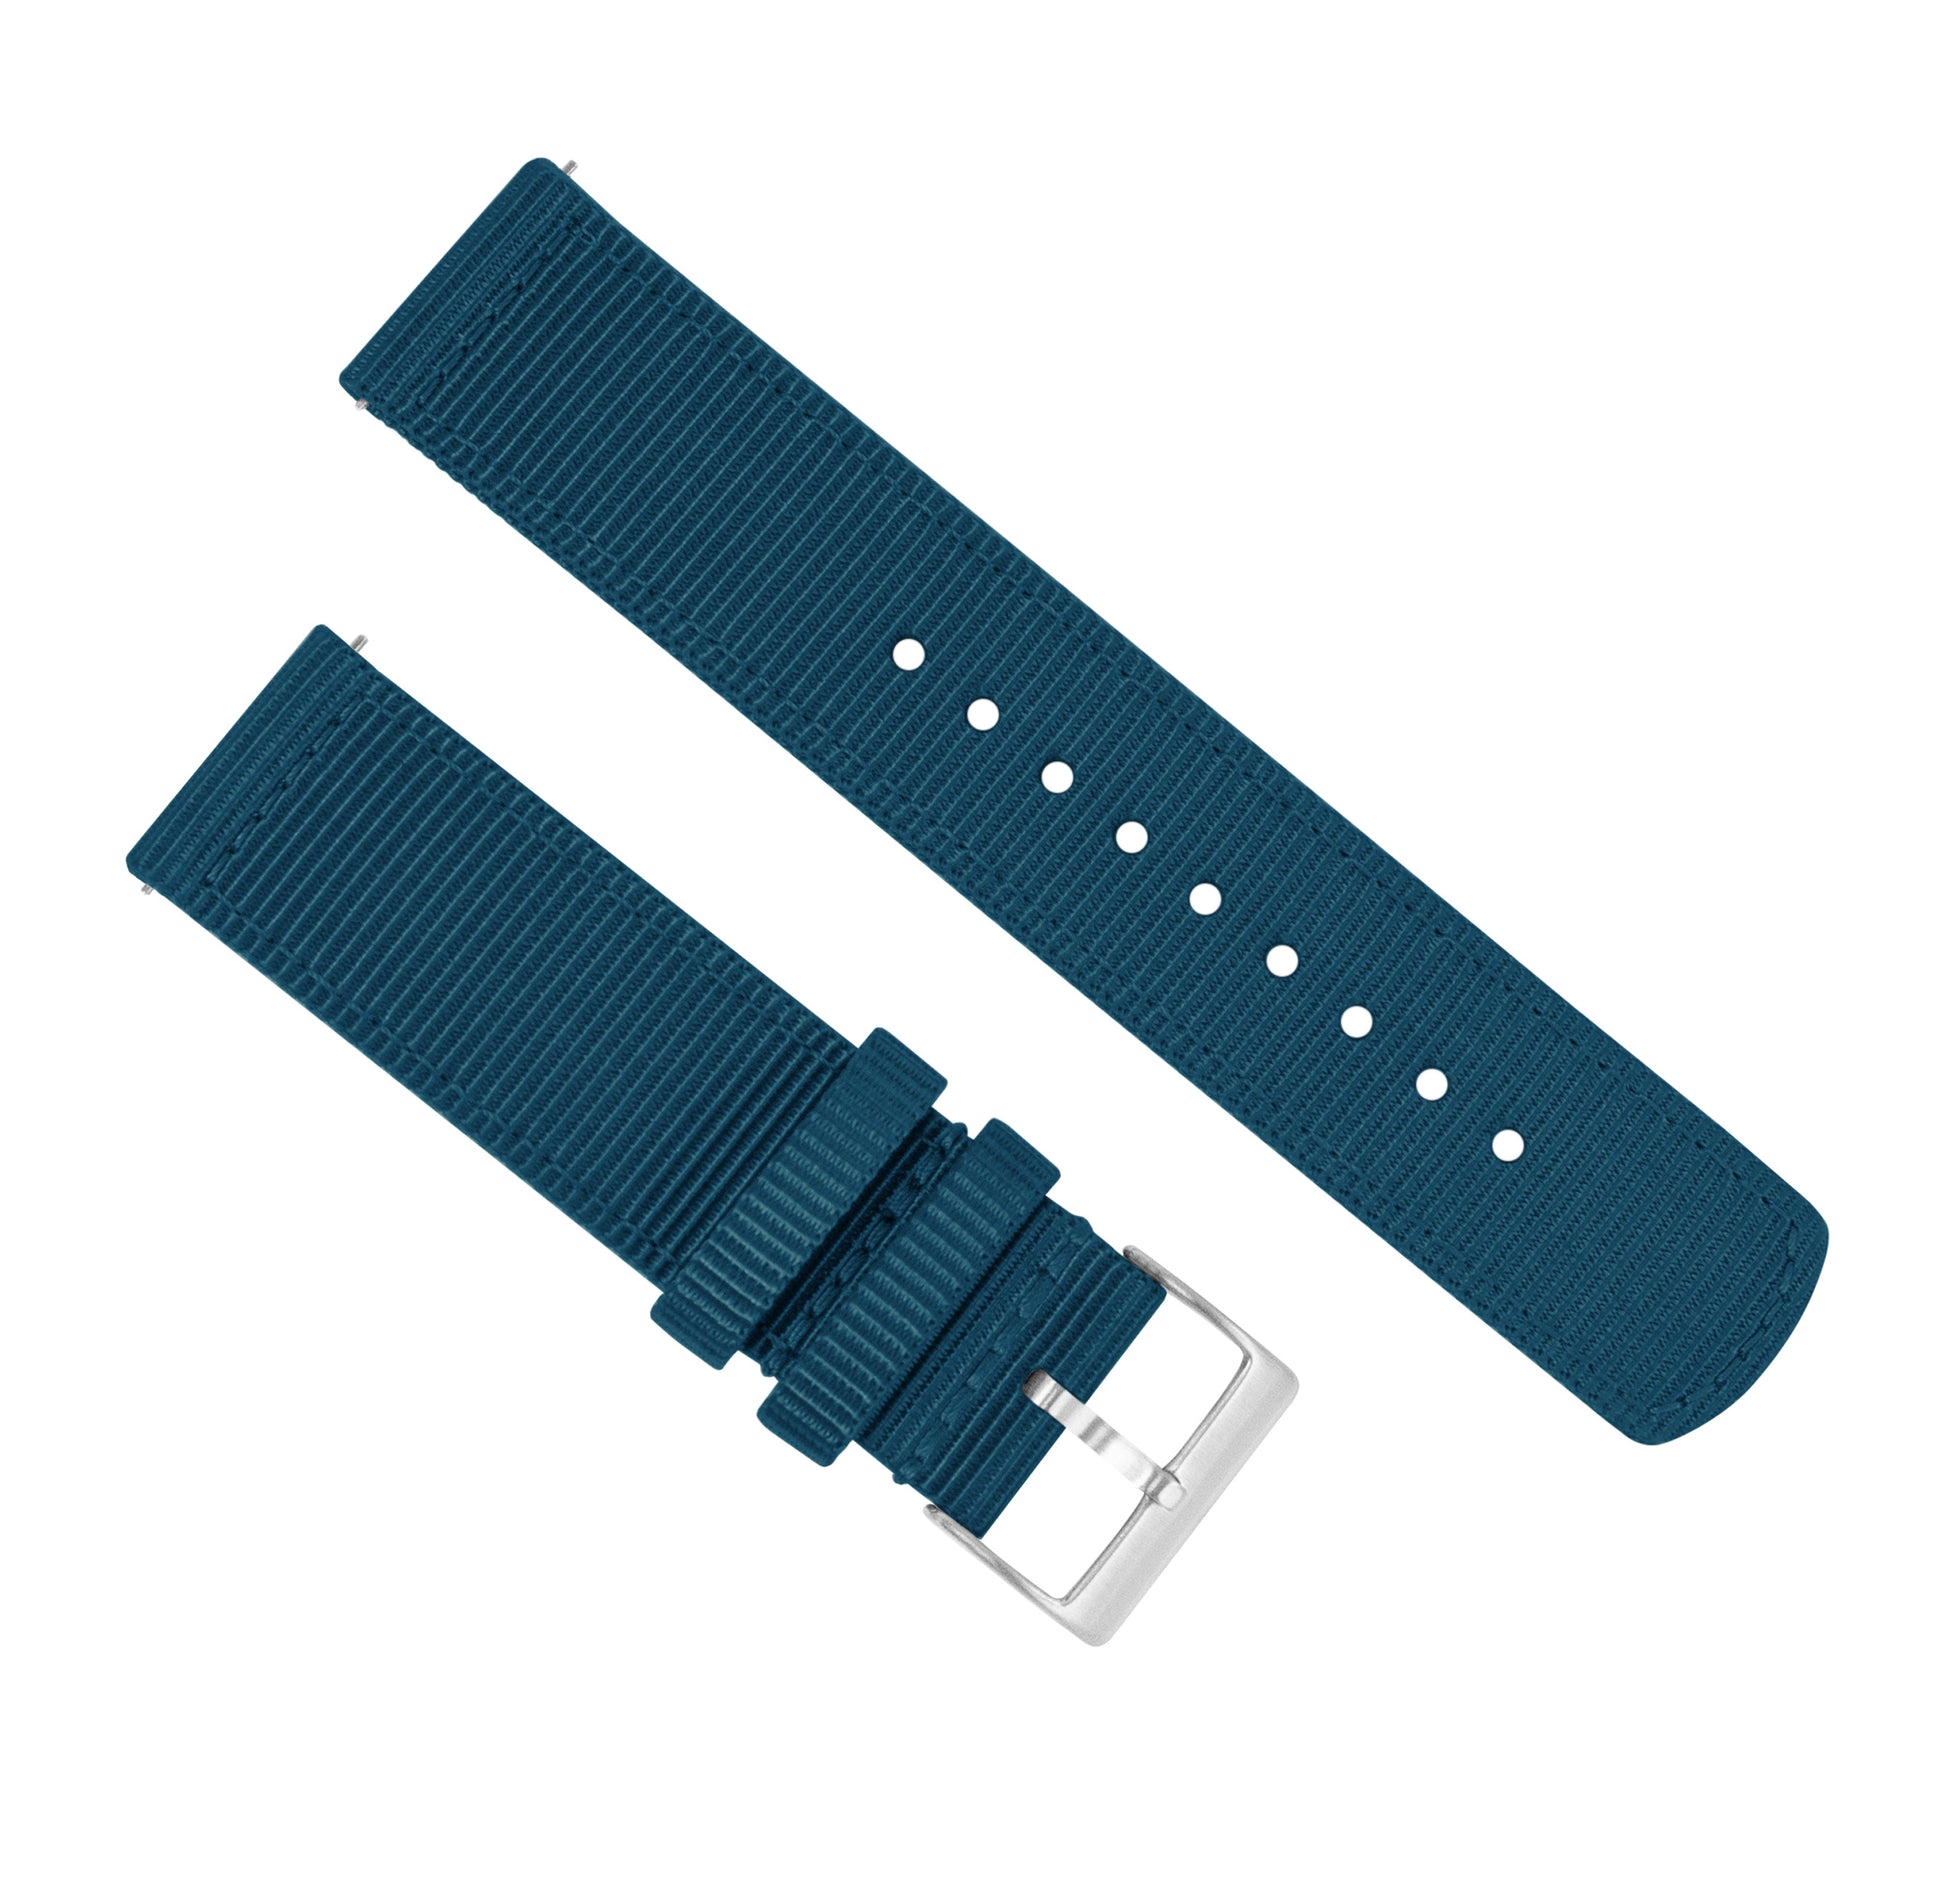 Fossil Gen 5 | Two-Piece NATO Style | Steel Blue - Barton Watch Bands